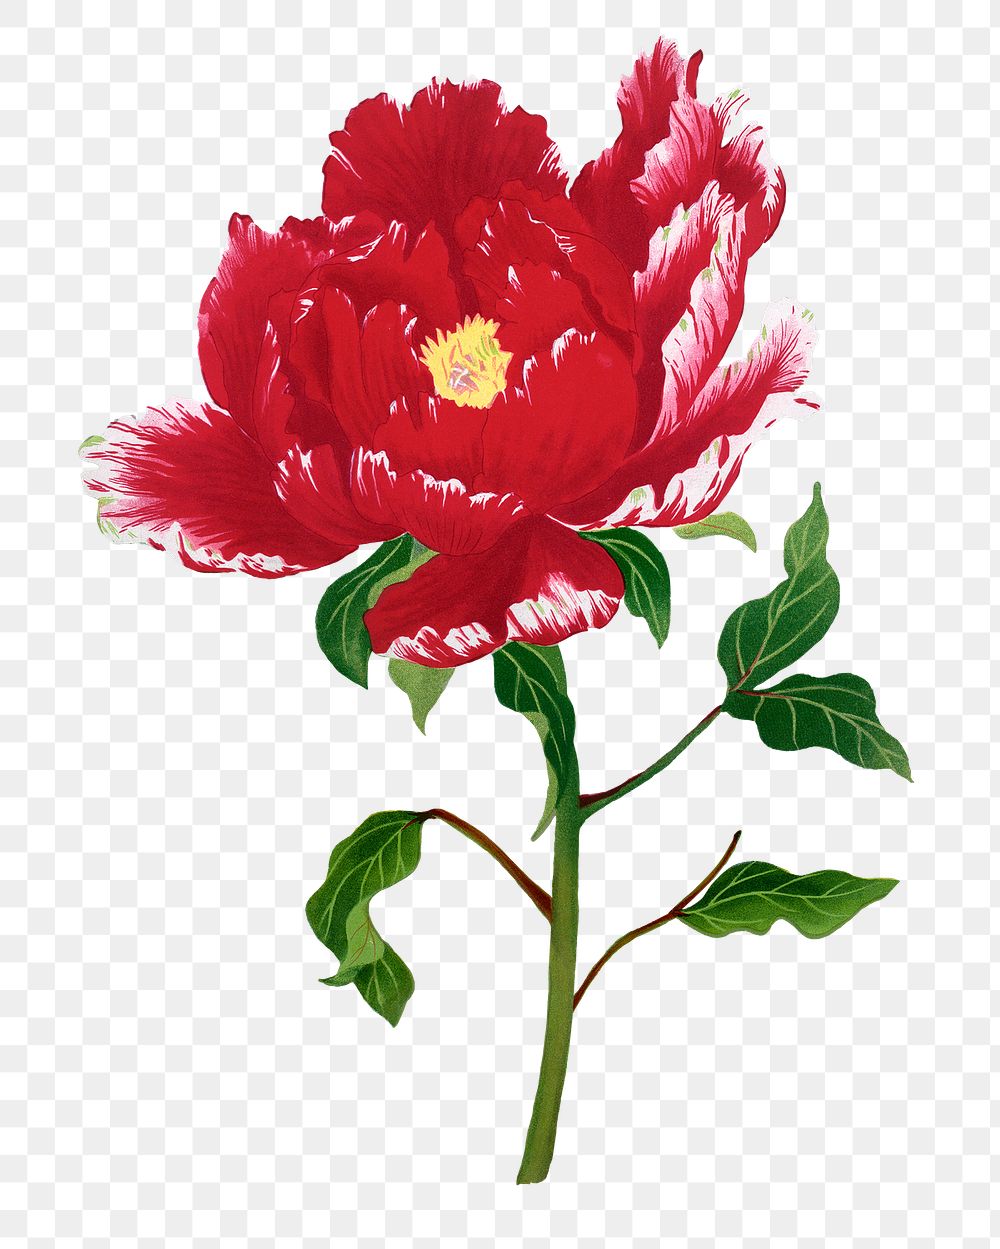 Aesthetic peony flower png sticker, floral clipart on transparent background